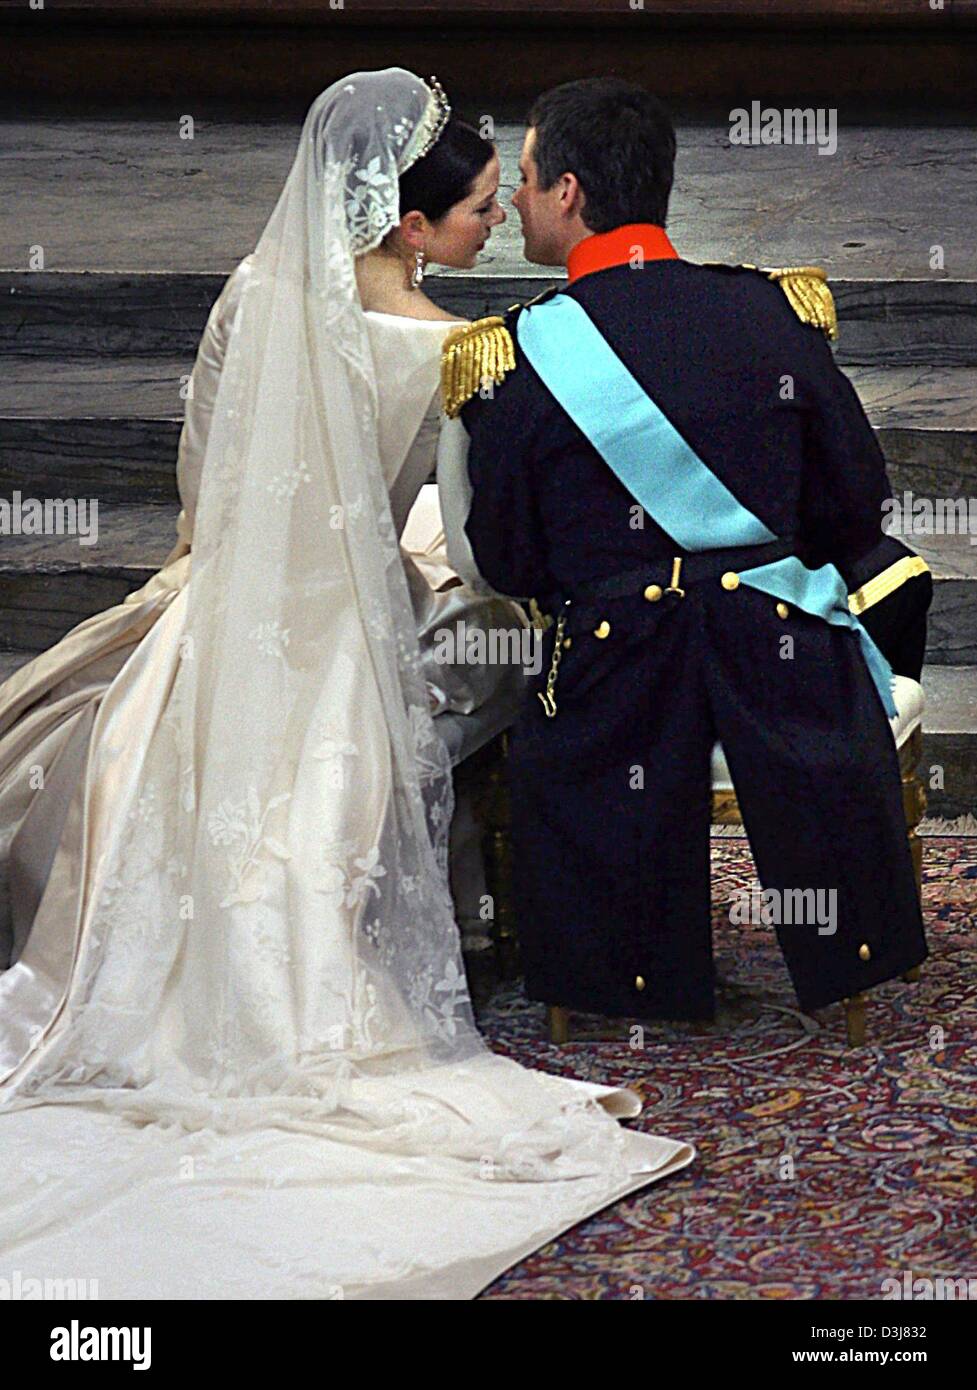 (dpa) - Danish crown prince Frederik (R) turns to his wife Mary Donaldson as both sit in front of the altar during their wedding ceremony at the cathedrale in Copenhagen, Denmark, Friday, 14 May 2004. Members of all European royal dynasties were among the 800 invited guests who attended the wedding. The thirtyfive-year-old heir to the Danish thrown met his thirtytwo-year-old bride  Stock Photo